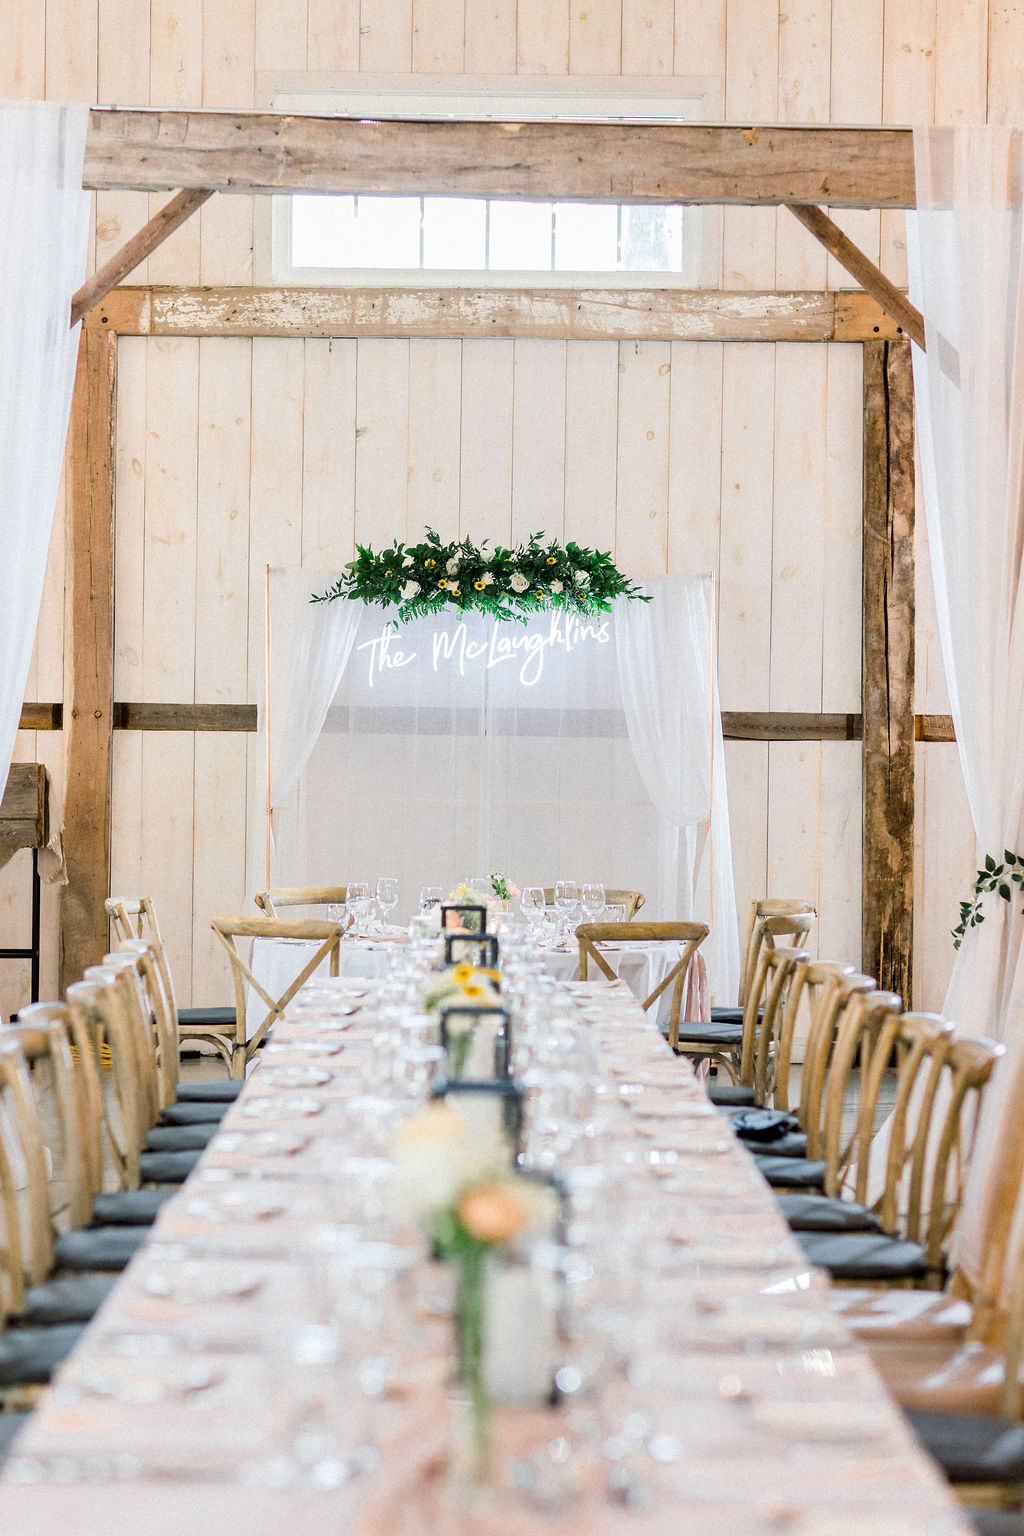 Floral Reef Designs Ottawa Wedding Florist - Amy Pinder Photography - Stonefields Estate wedding - neon signage with complementary greenery and floral installation overlooking table with small bud vases of pastel flowers